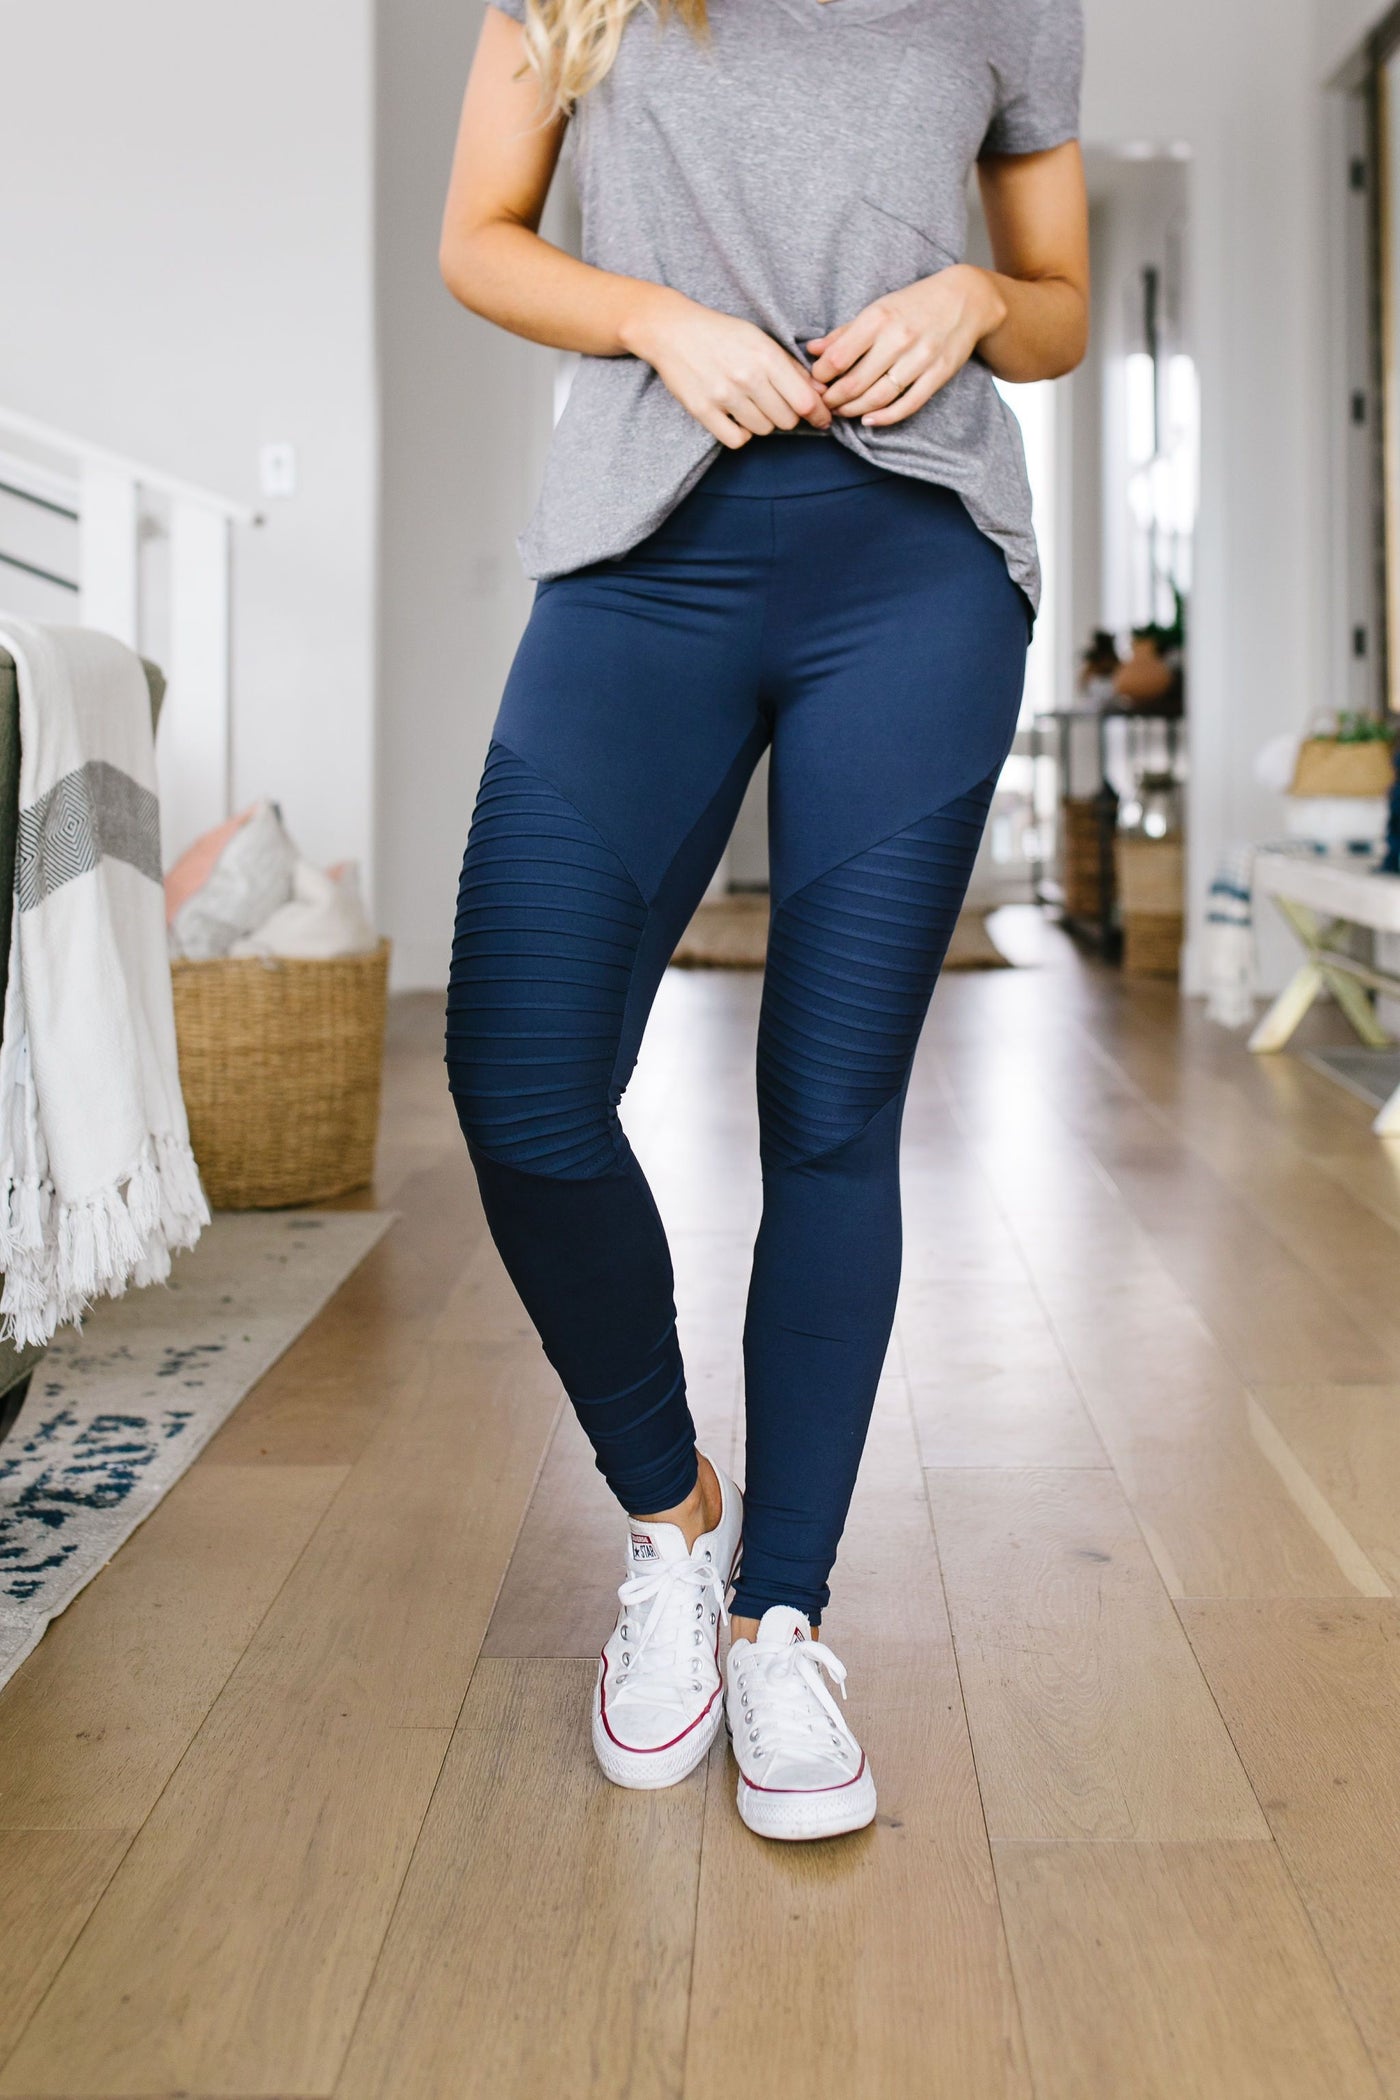 Soft As Butter Moto Leggings In Navy – The Teal Turtle Boutique